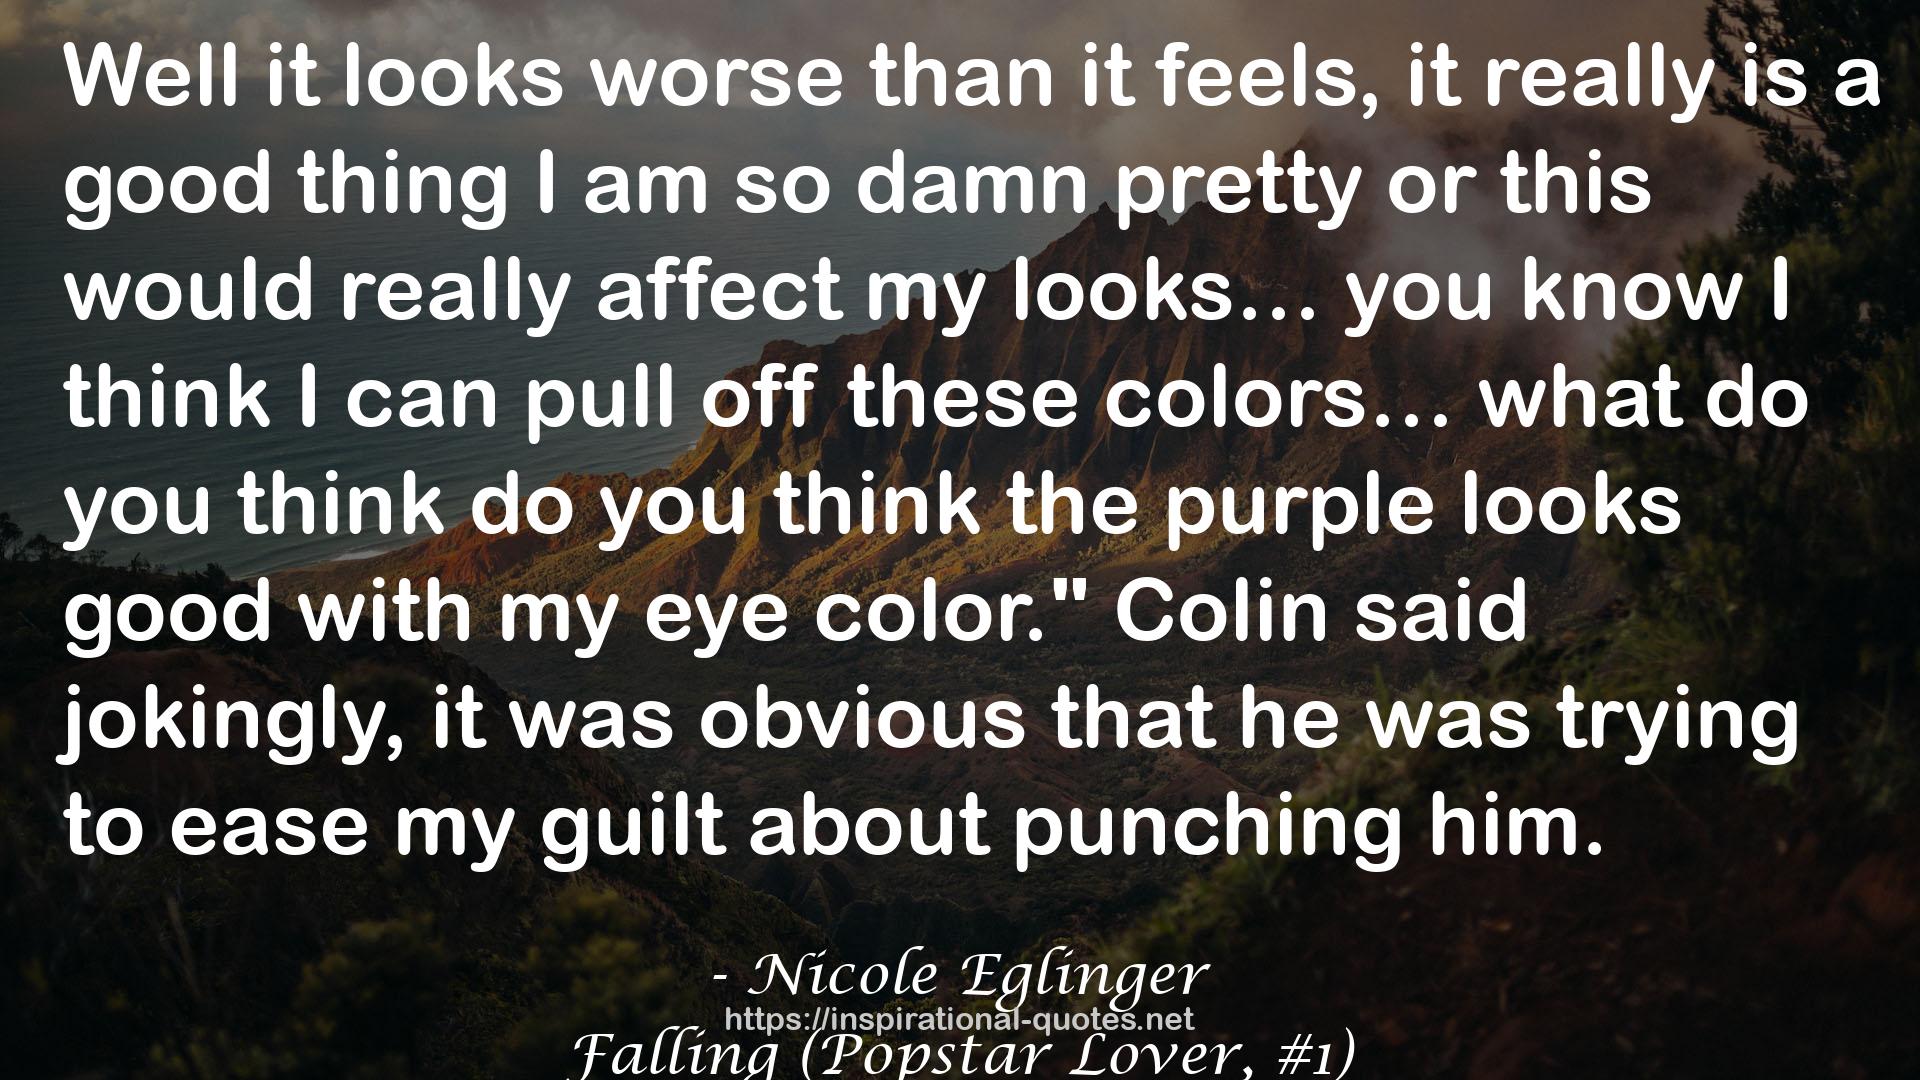 Falling (Popstar Lover, #1) QUOTES